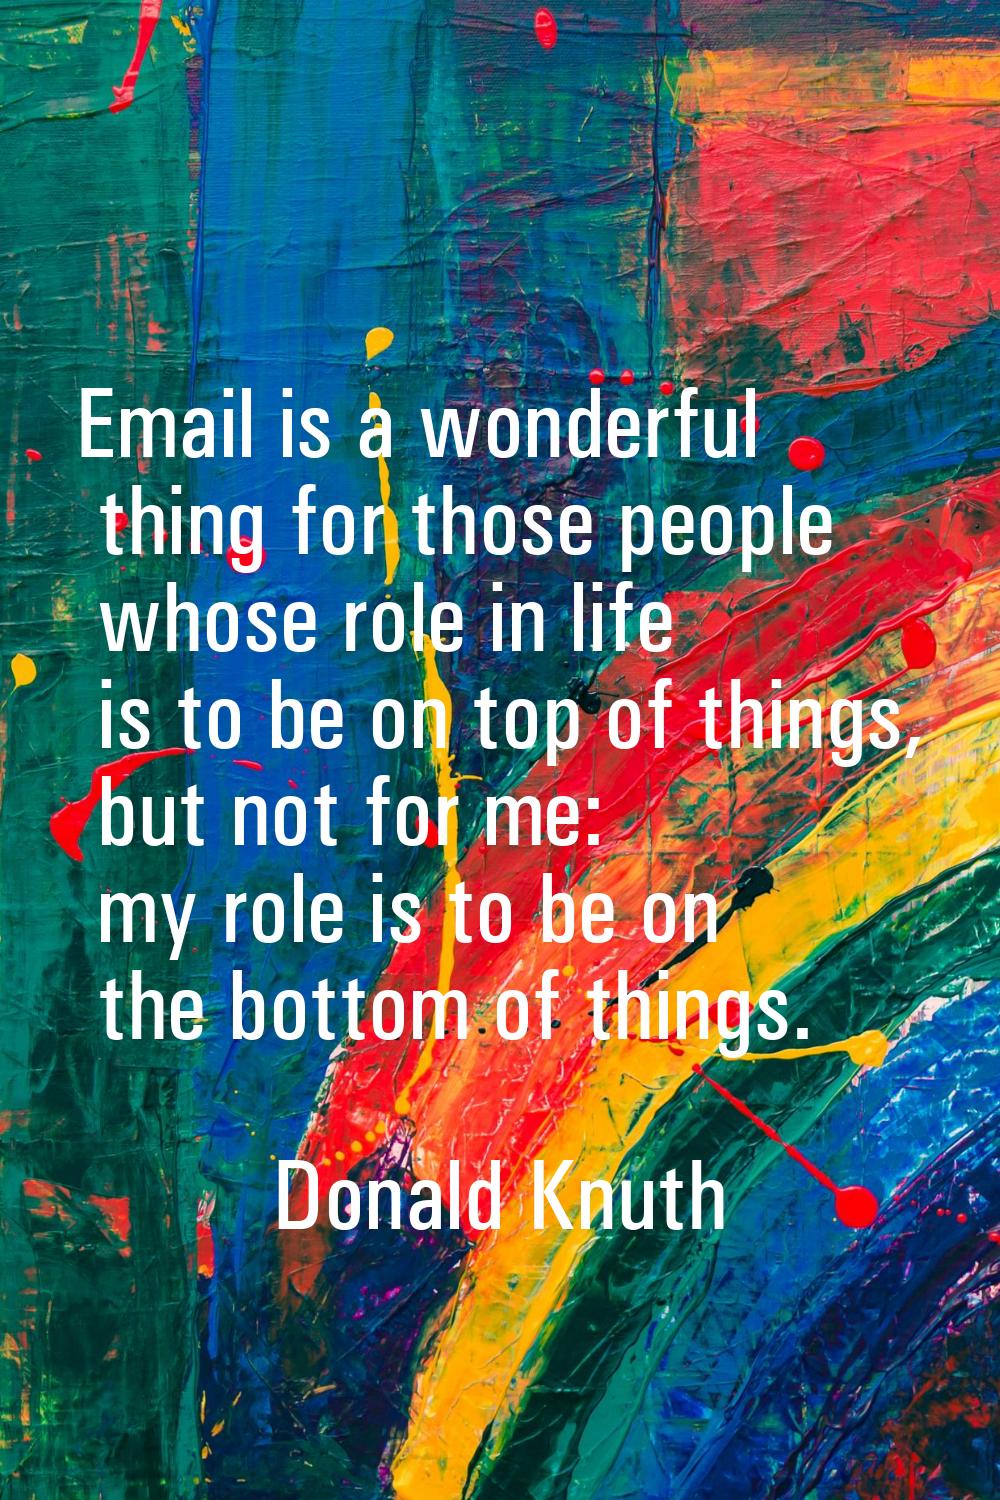 Email is a wonderful thing for those people whose role in life is to be on top of things, but not f